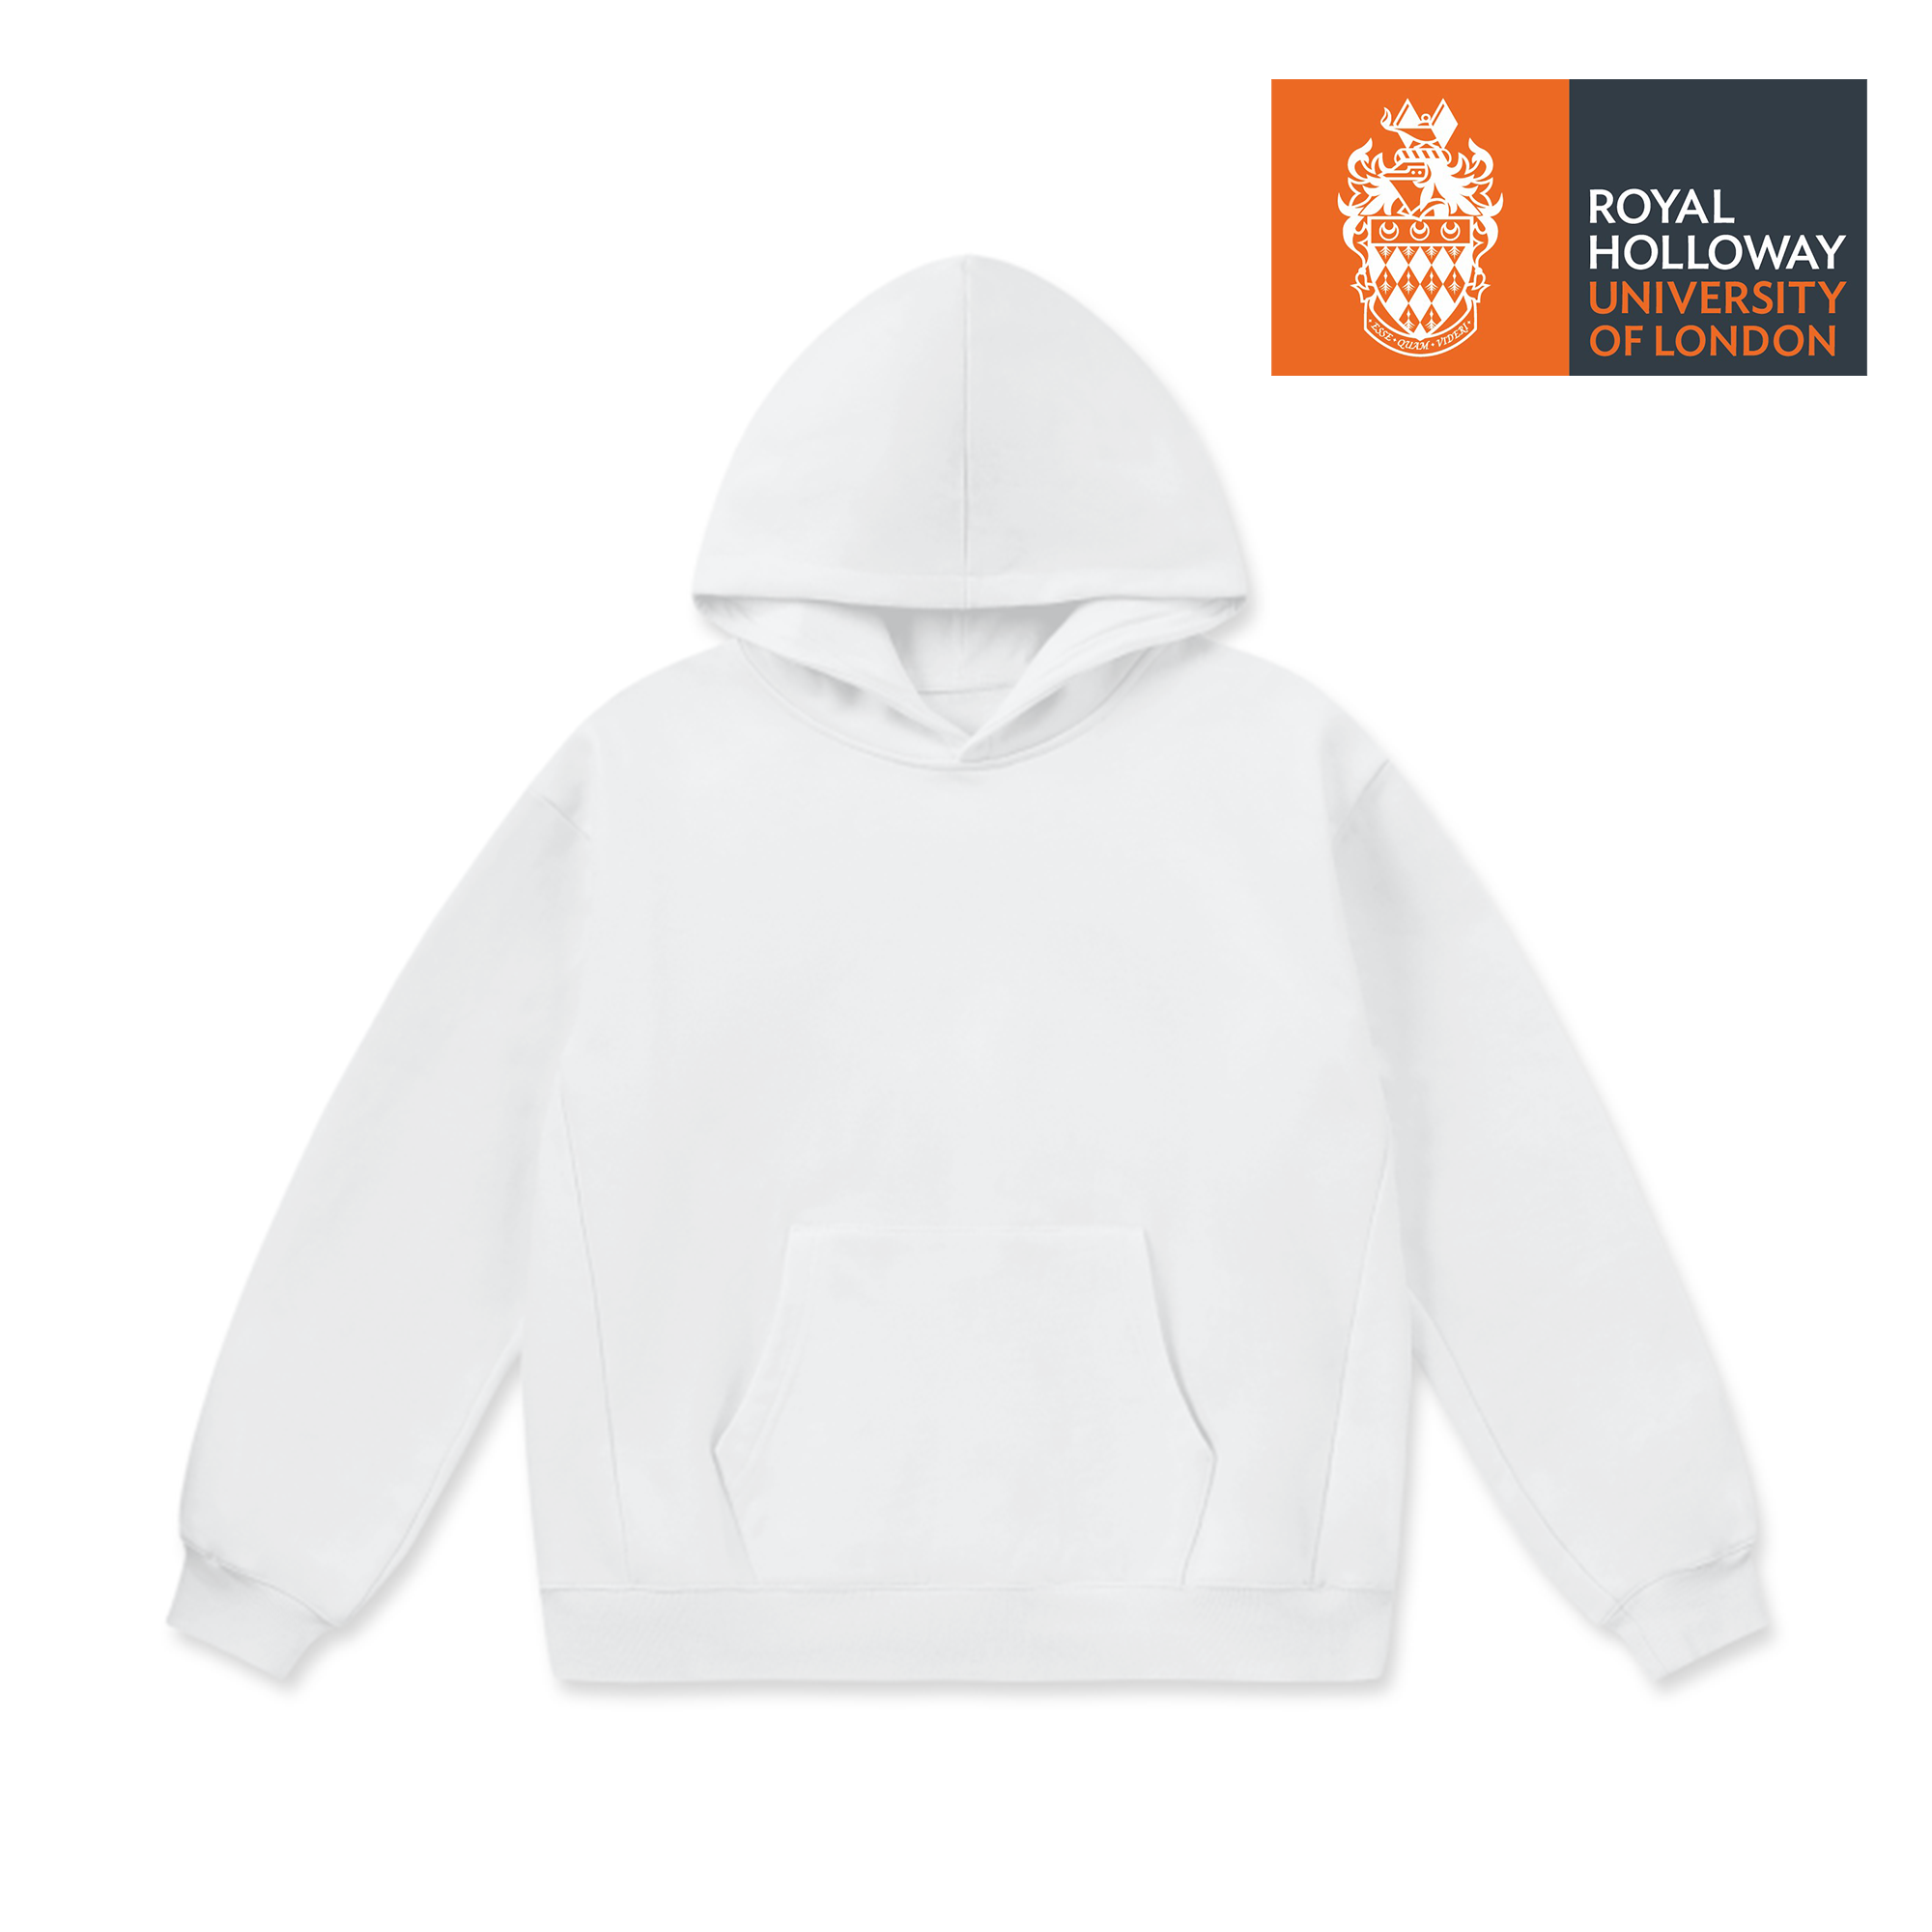 LCC Super Weighted Hoodie - Royal Holloway University of London (Full Ver.2)